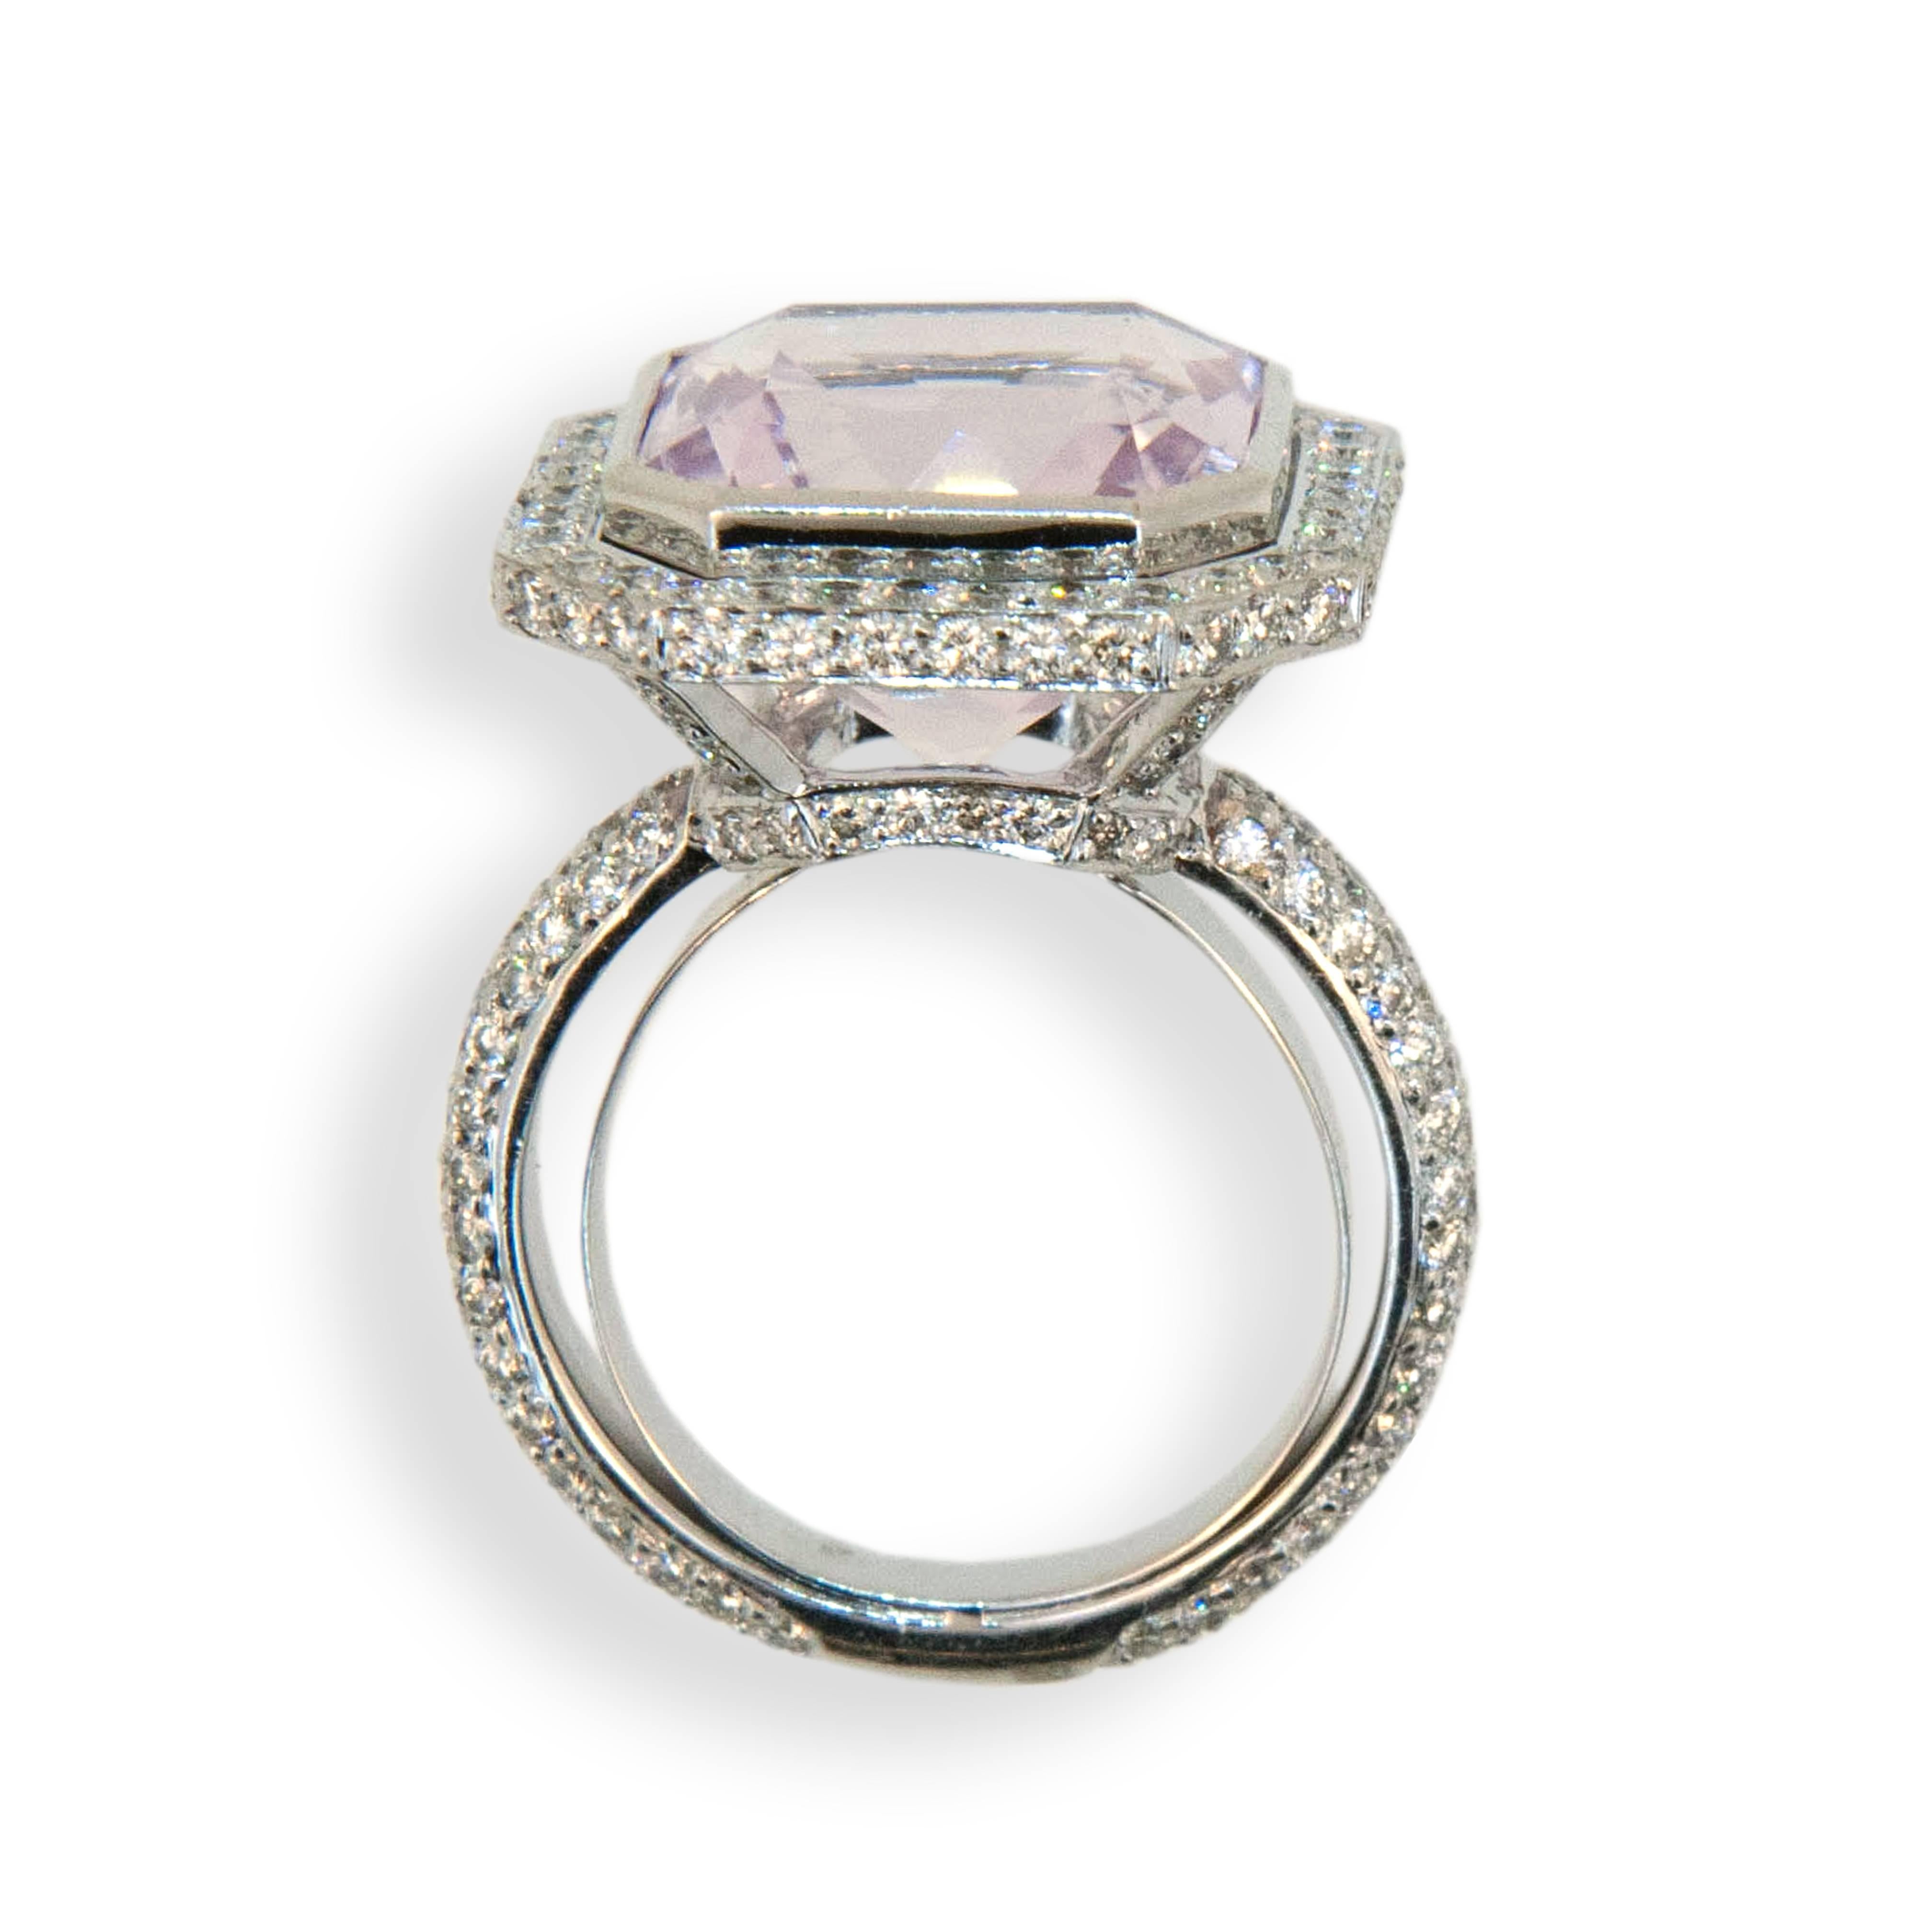 18 karat white gold ring set with an octagonal cut Kunzite 11.49 carats total weight 12.91 mm x 9.17 depth x 15.04 and micro-set with  206 round diamonds 1.97 carats total weight. Ring is a size 6.75 with a horseshoe.
